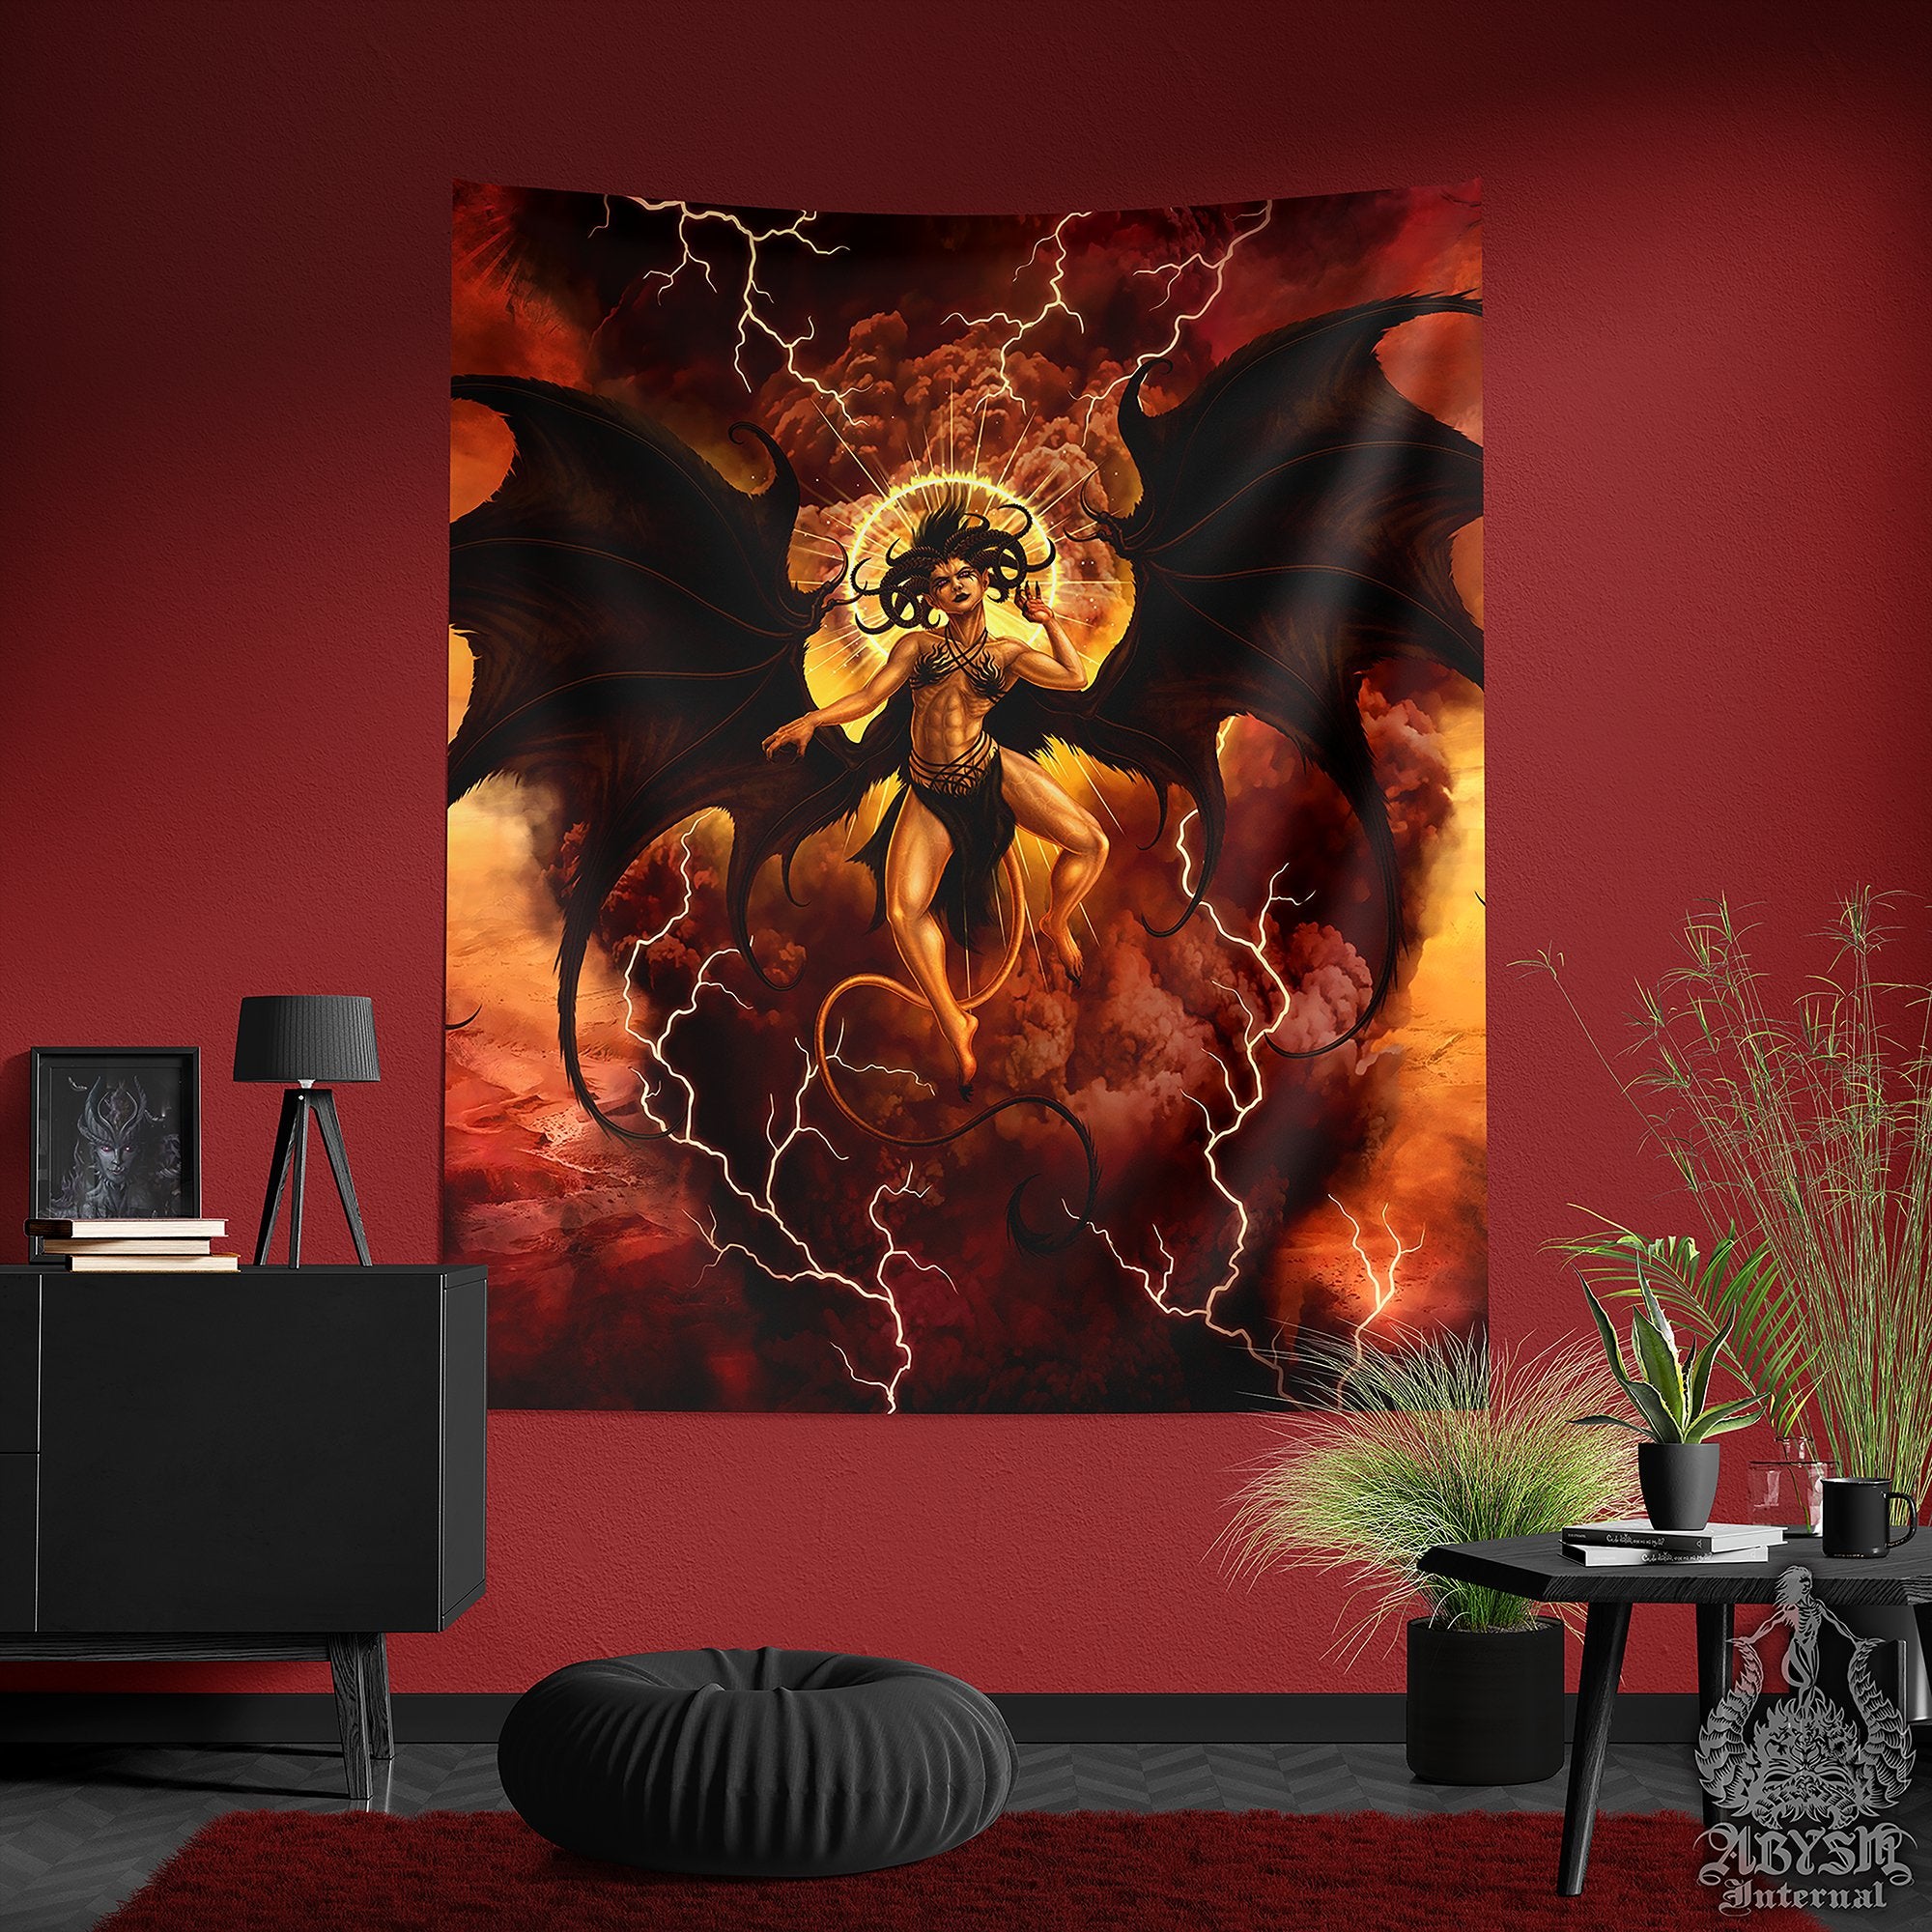 Lilith Tapestry, Satanic Wall Print, Dark and Erotic Fantasy Decor, Sexy Demoness - Nude, Semi, Clothed, 3 versions - Abysm Internal